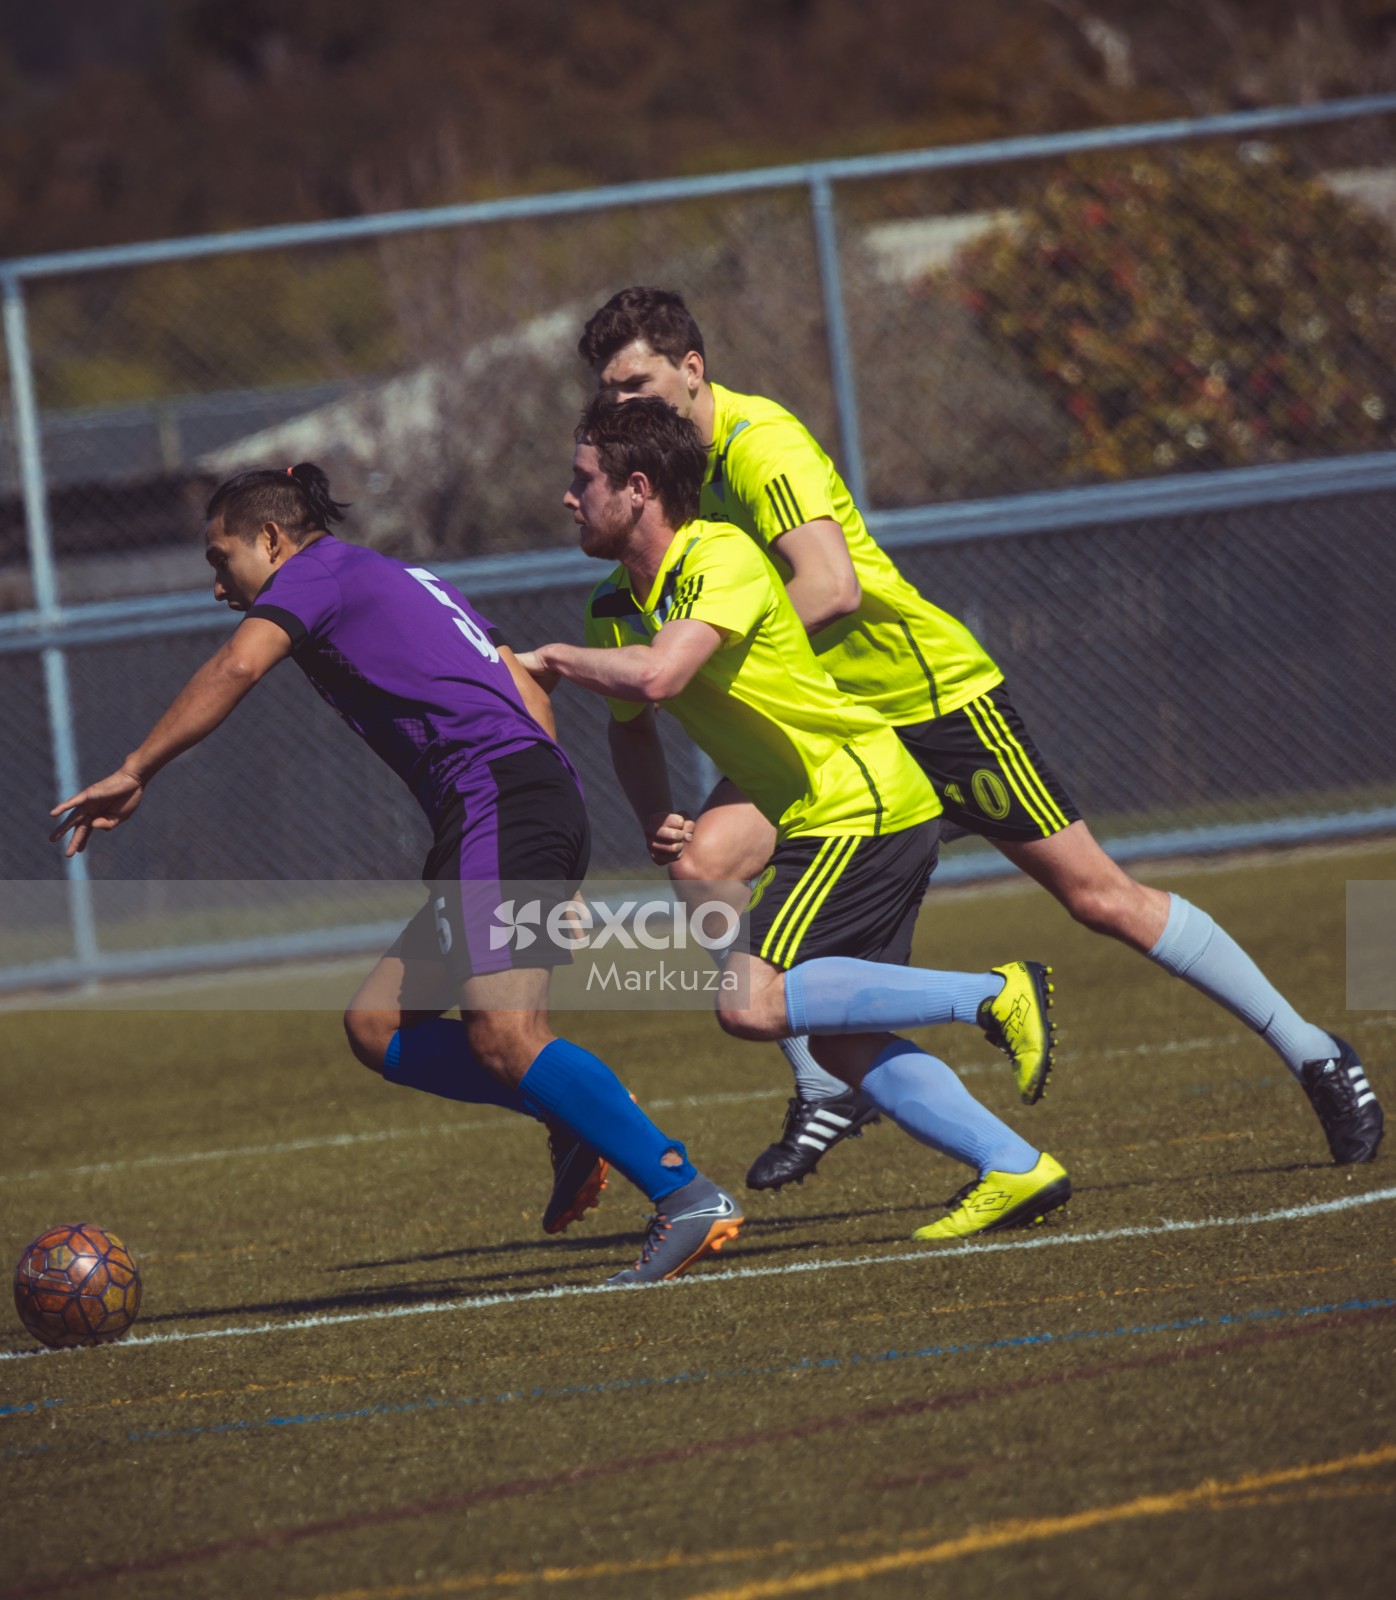 Two players in lime neon shirts try to tackle opponent - Sports Zone sunday league